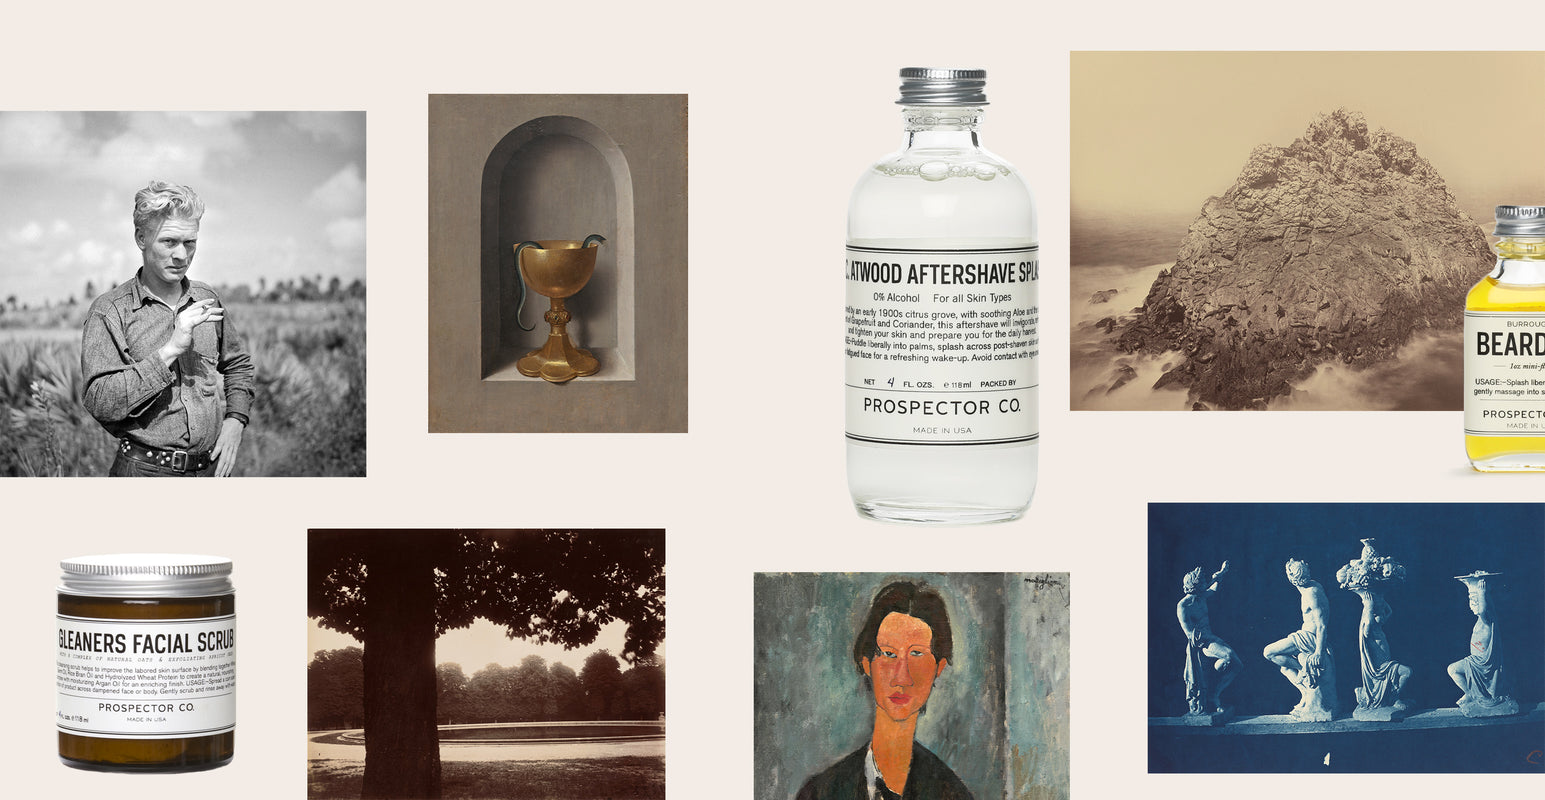 A collage of images including a black and white portrait of a man with a cigarette and blonde hair, a painting of a man, a blue-hued image of sculptures, a large sepia-toned rock, a glass bottle of product, another glass bottle of product, a jar of product, a landscape of a pond, and lastly a niche with a gold cup that a serpent is snaking out of.